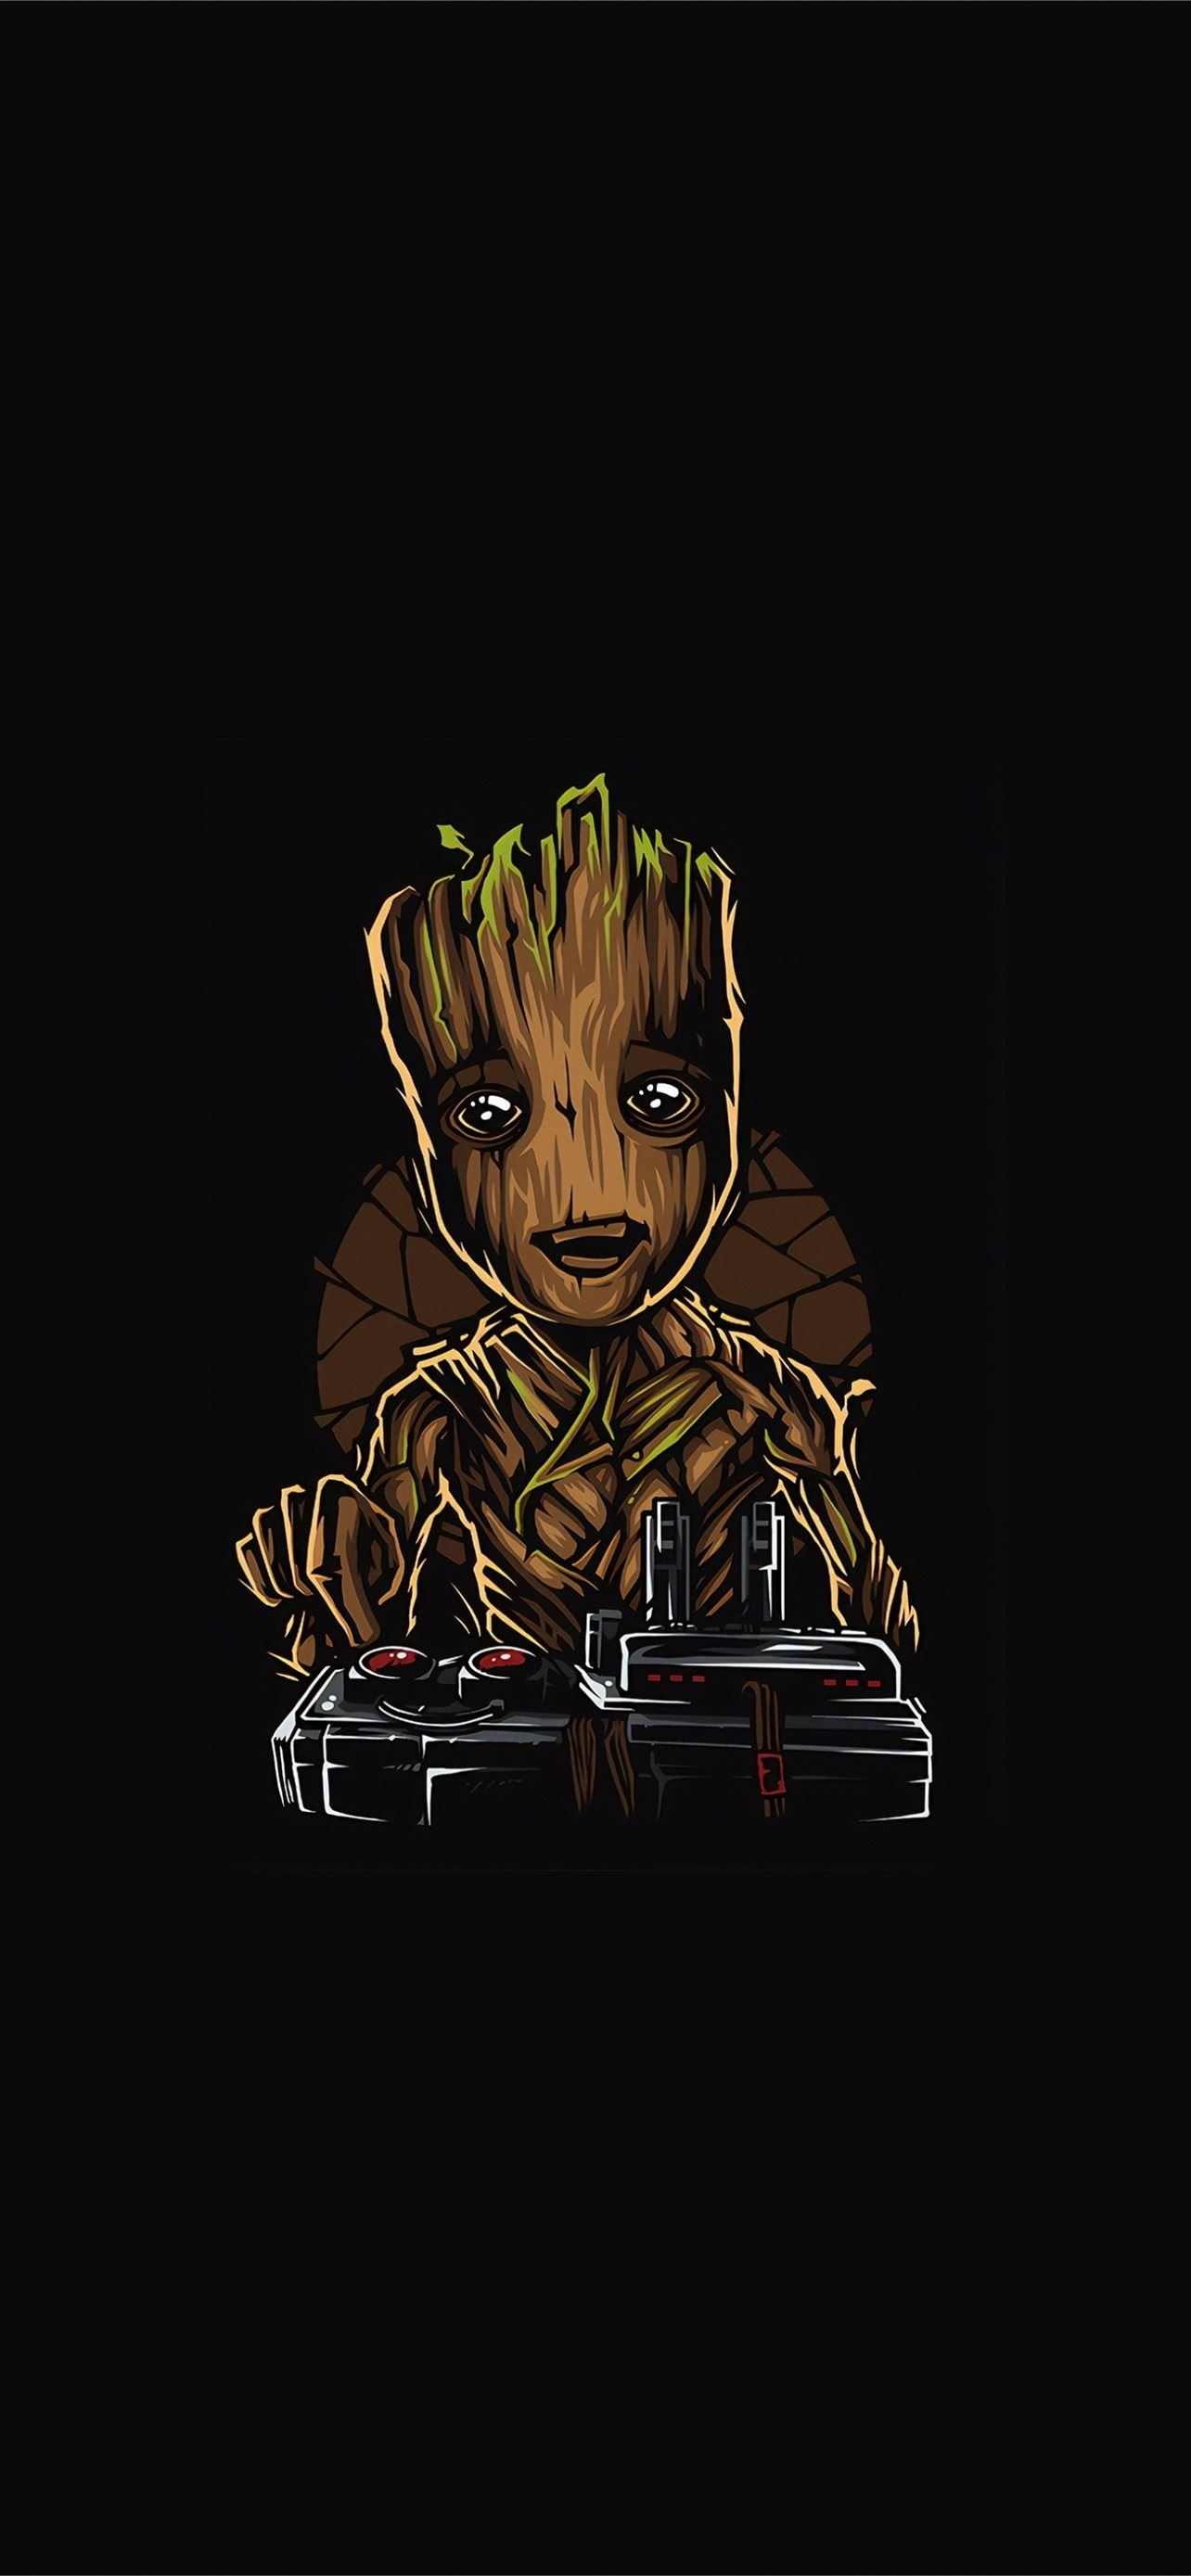 Cute Baby Groot Guardian Art Samsung Galaxy S8 Sam Iphone Wallpapers Free Download